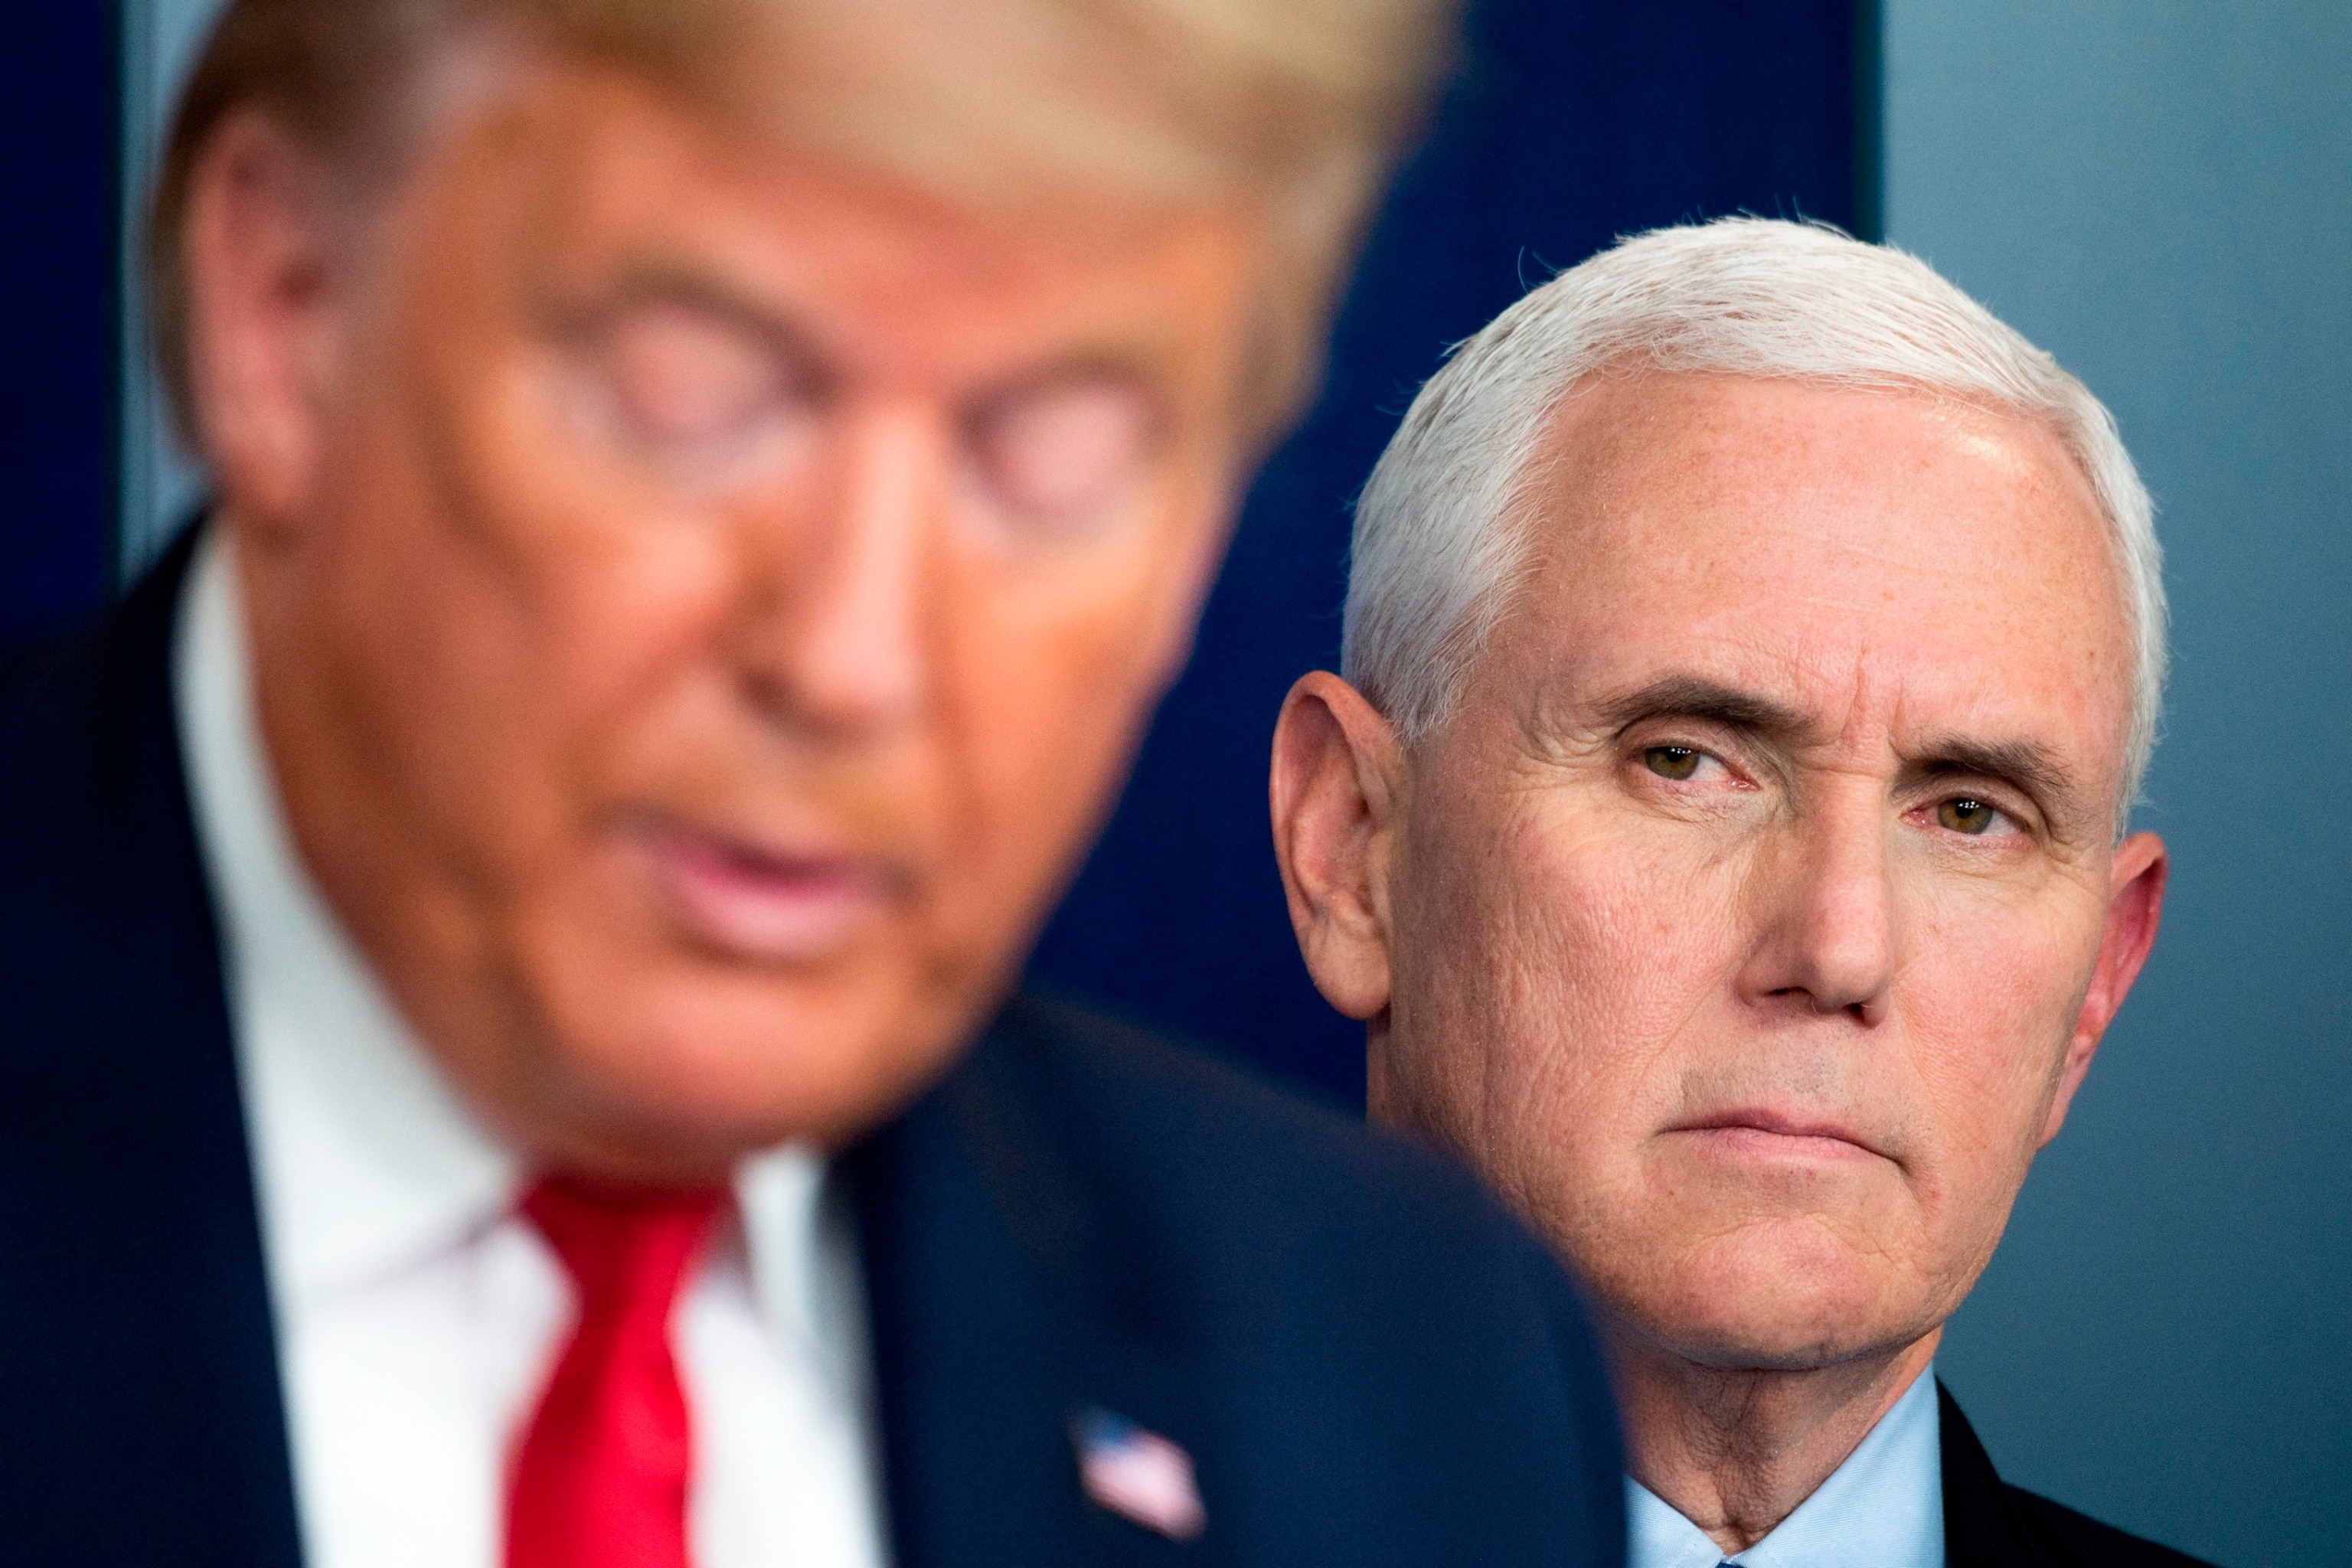 PHOTO: Vice President Mike Pence listens as President Donald Trump speaks during a press briefing at the White House in Washington, DC, on March 26, 2020.